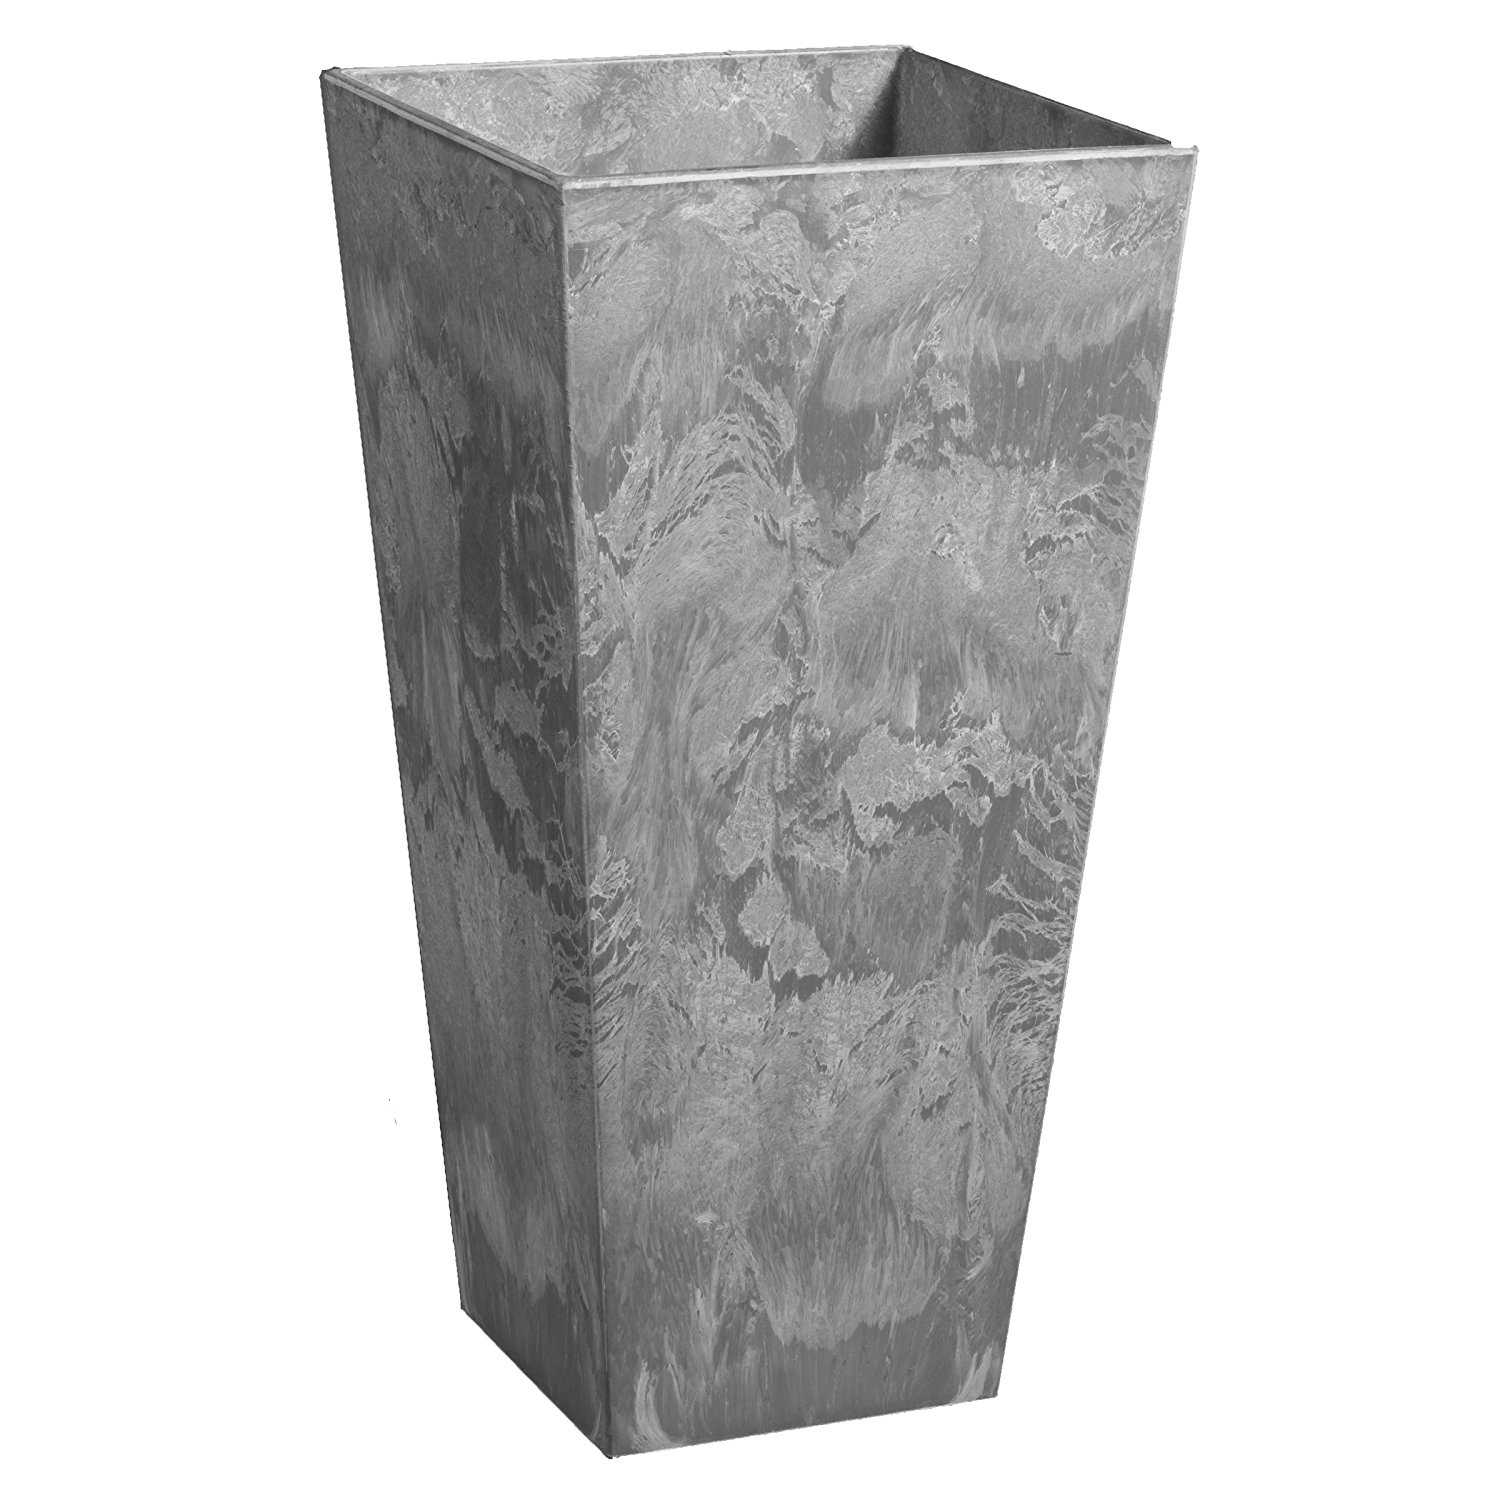 Beautiful Flower Pots and Planters Under $25!